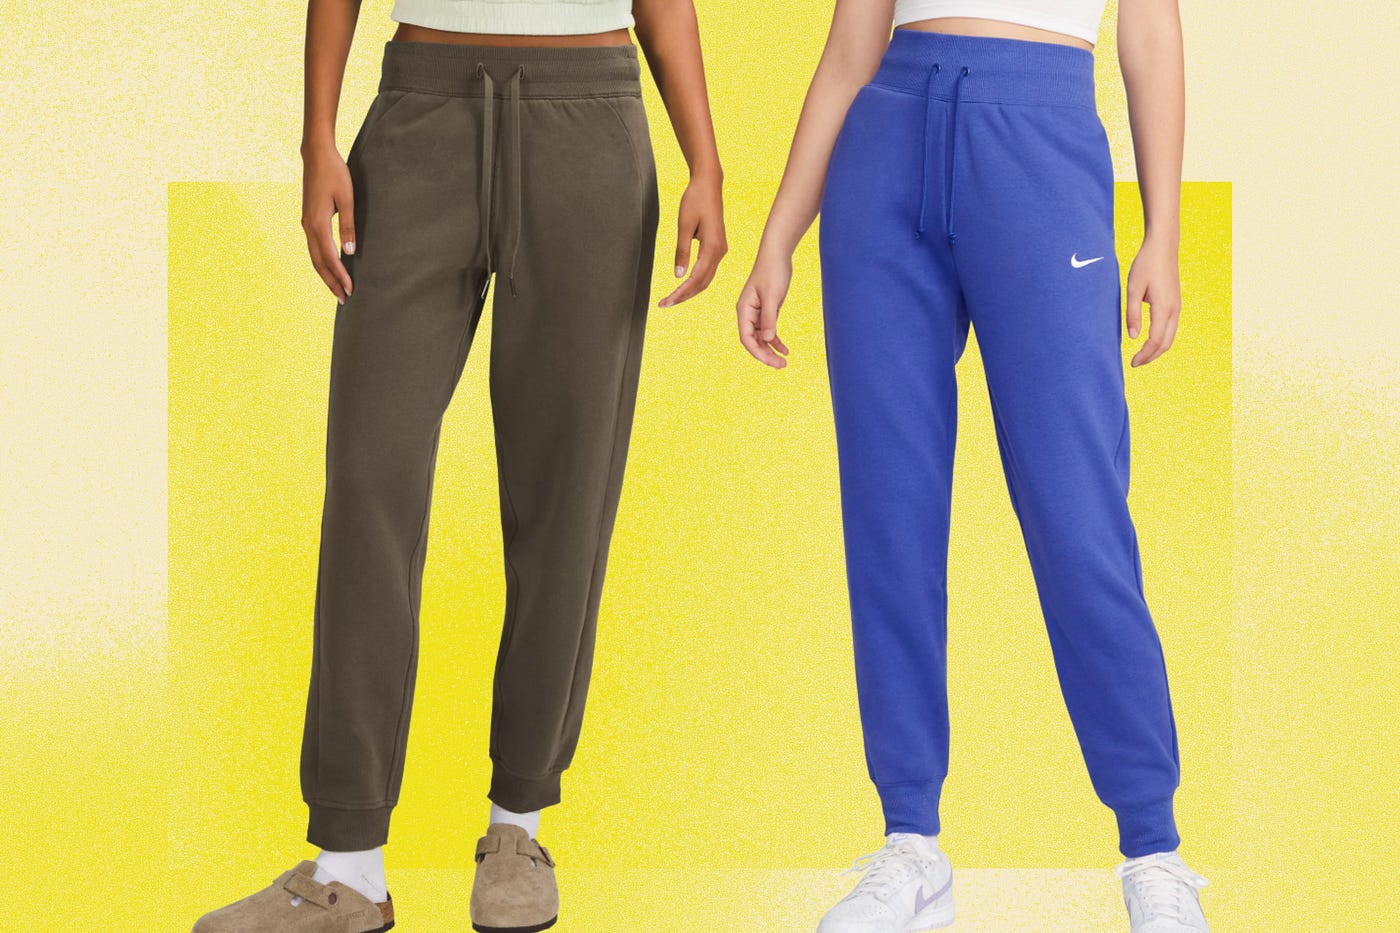 How to Choose the Perfect Pair of Sweatpants for Your Body Type